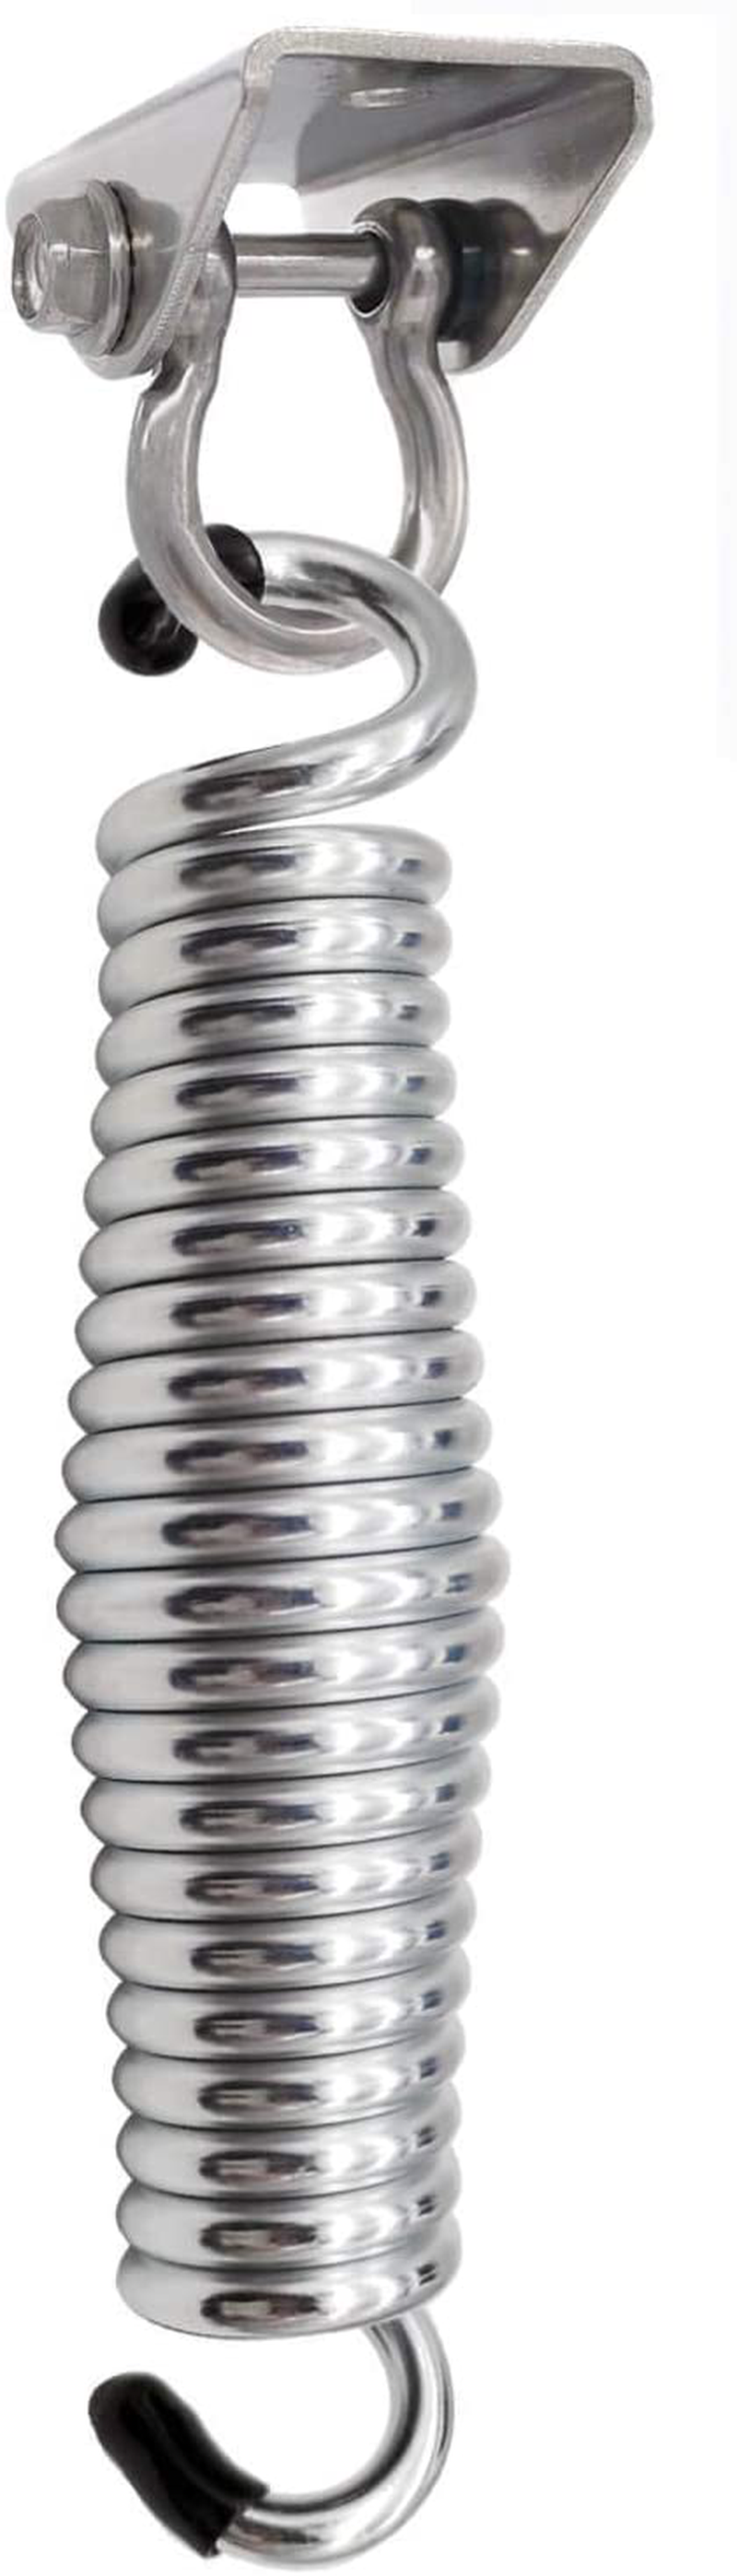 Heavy Duty Porch Swing Springs - 800Lbs Hammock Chair Spring, Hanger Ceiling Mount Spring(Pack of 1)